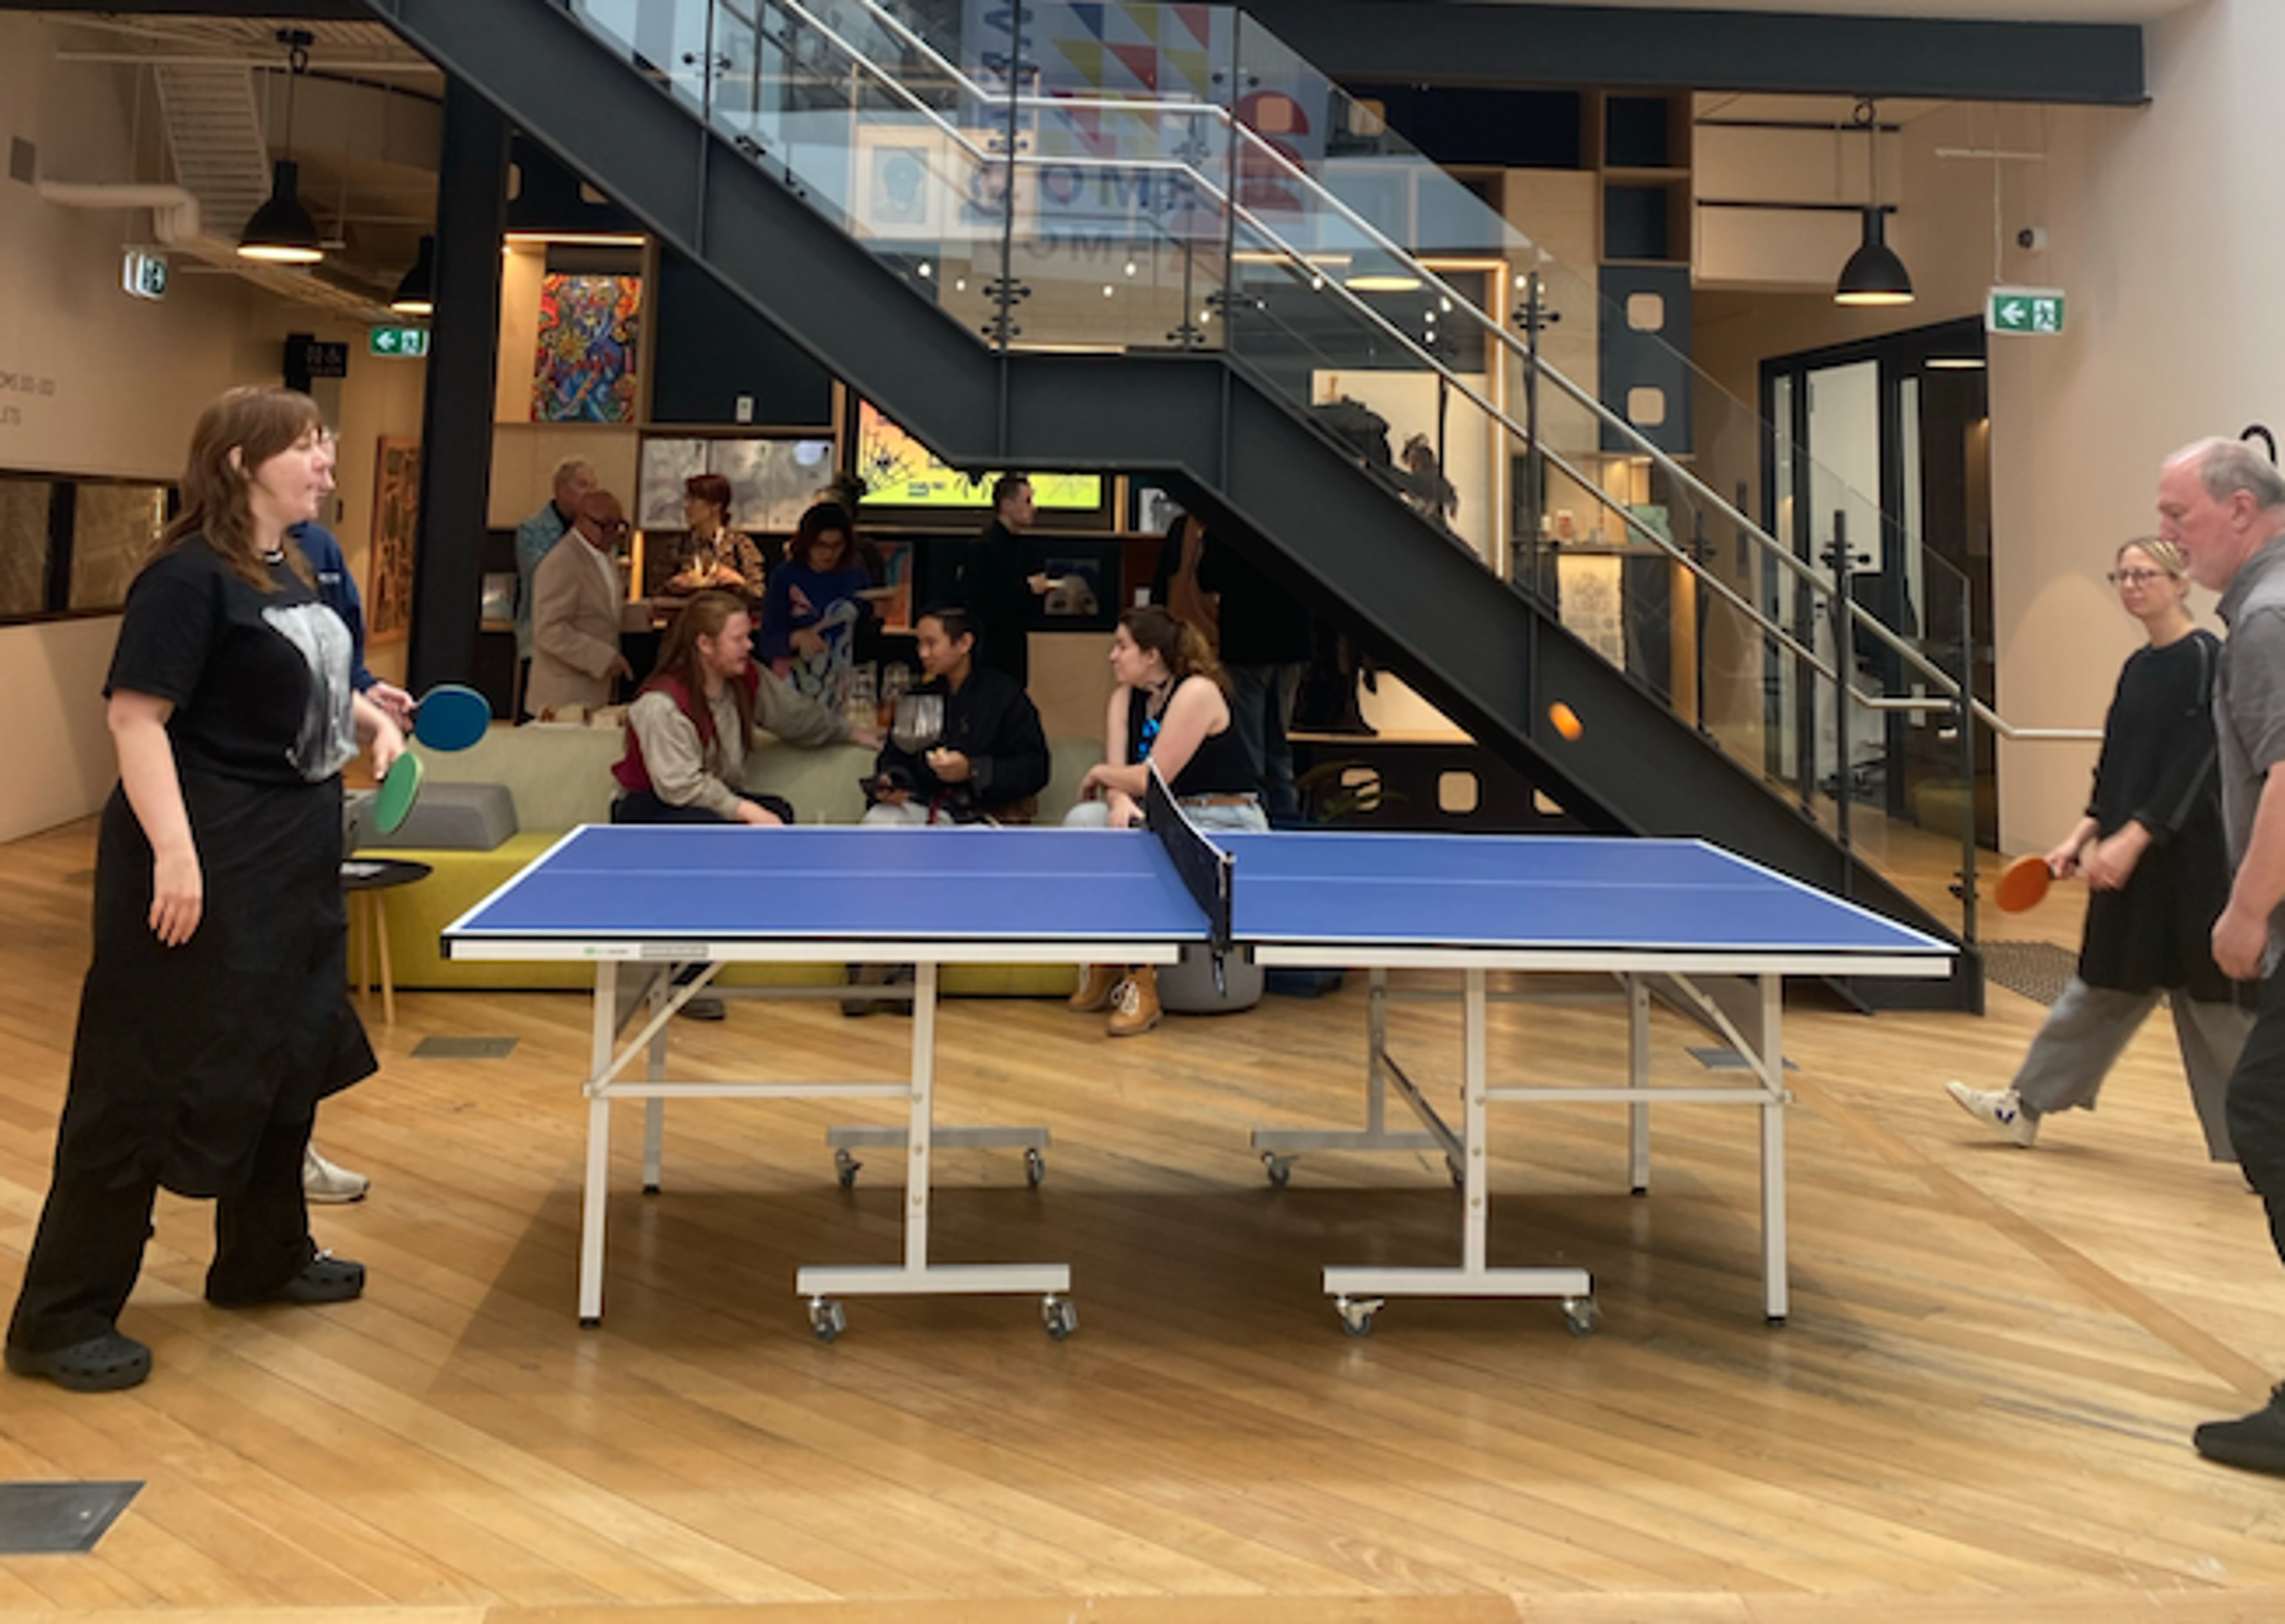 Colleagues enjoy a friendly game of table tennis in a vibrant, welcoming office space.